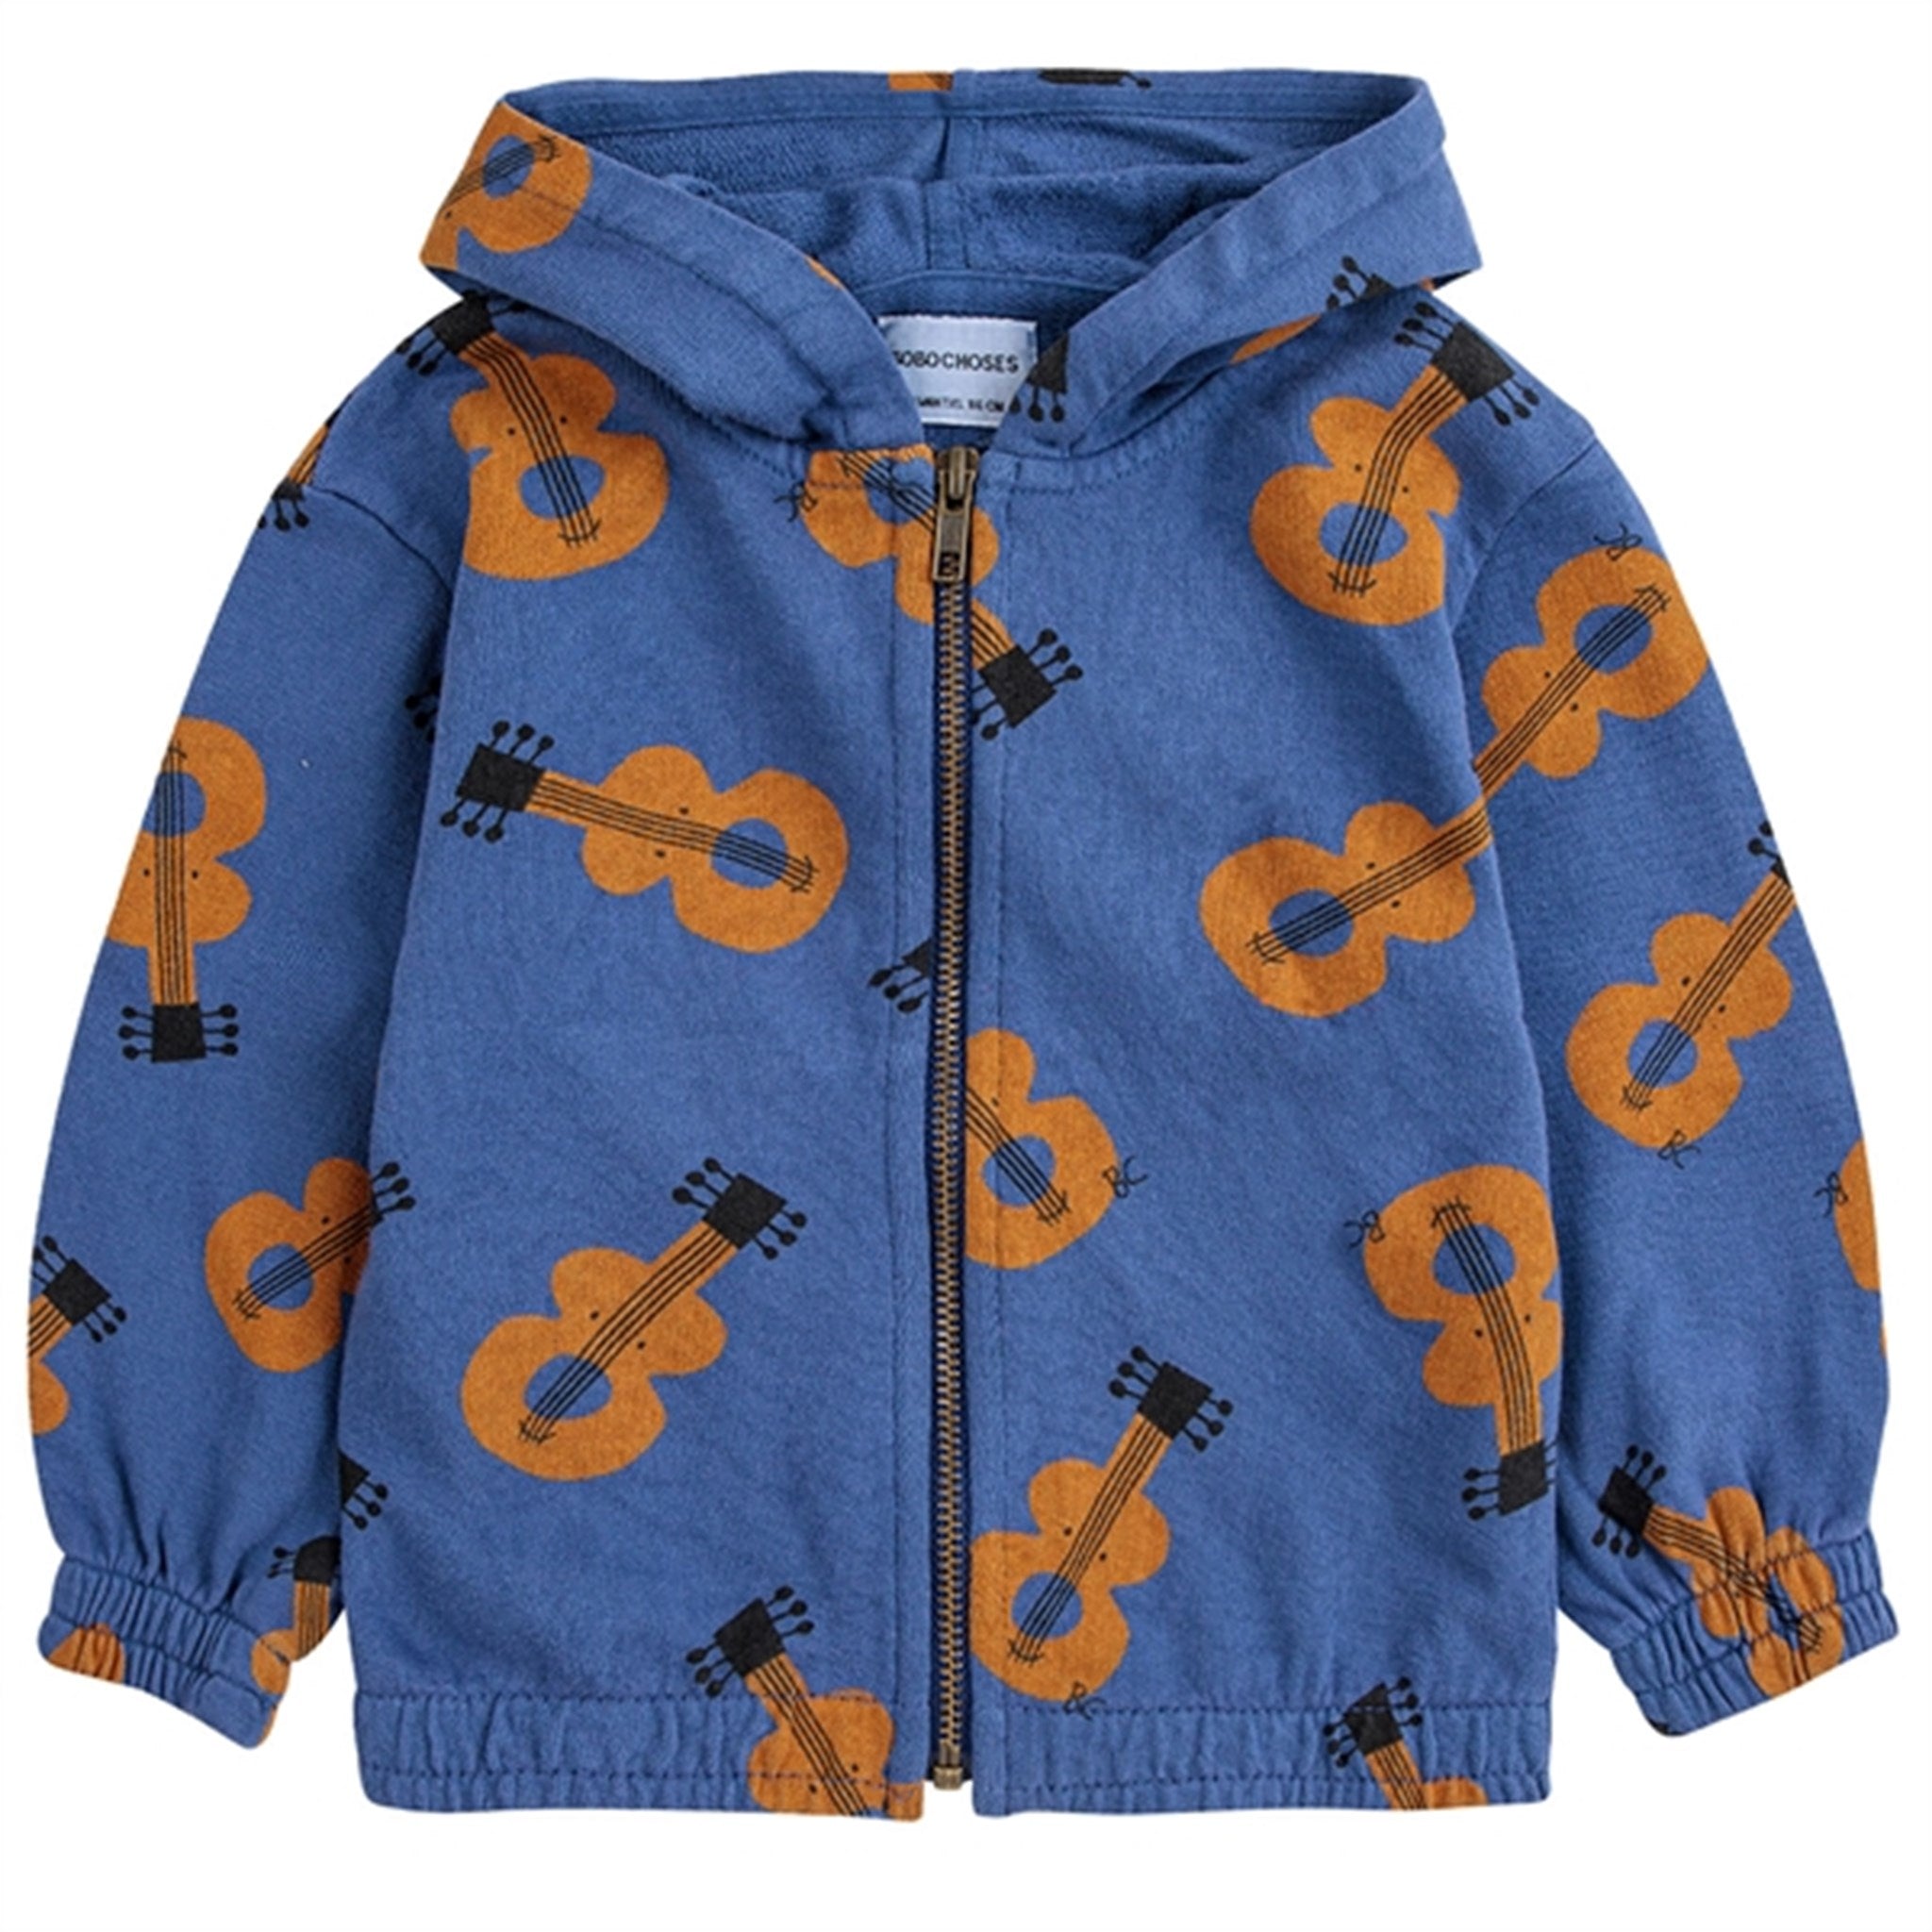 Bobo Choses Baby Acoustic Guitar All Over Zipped Hoodie Navy Blue